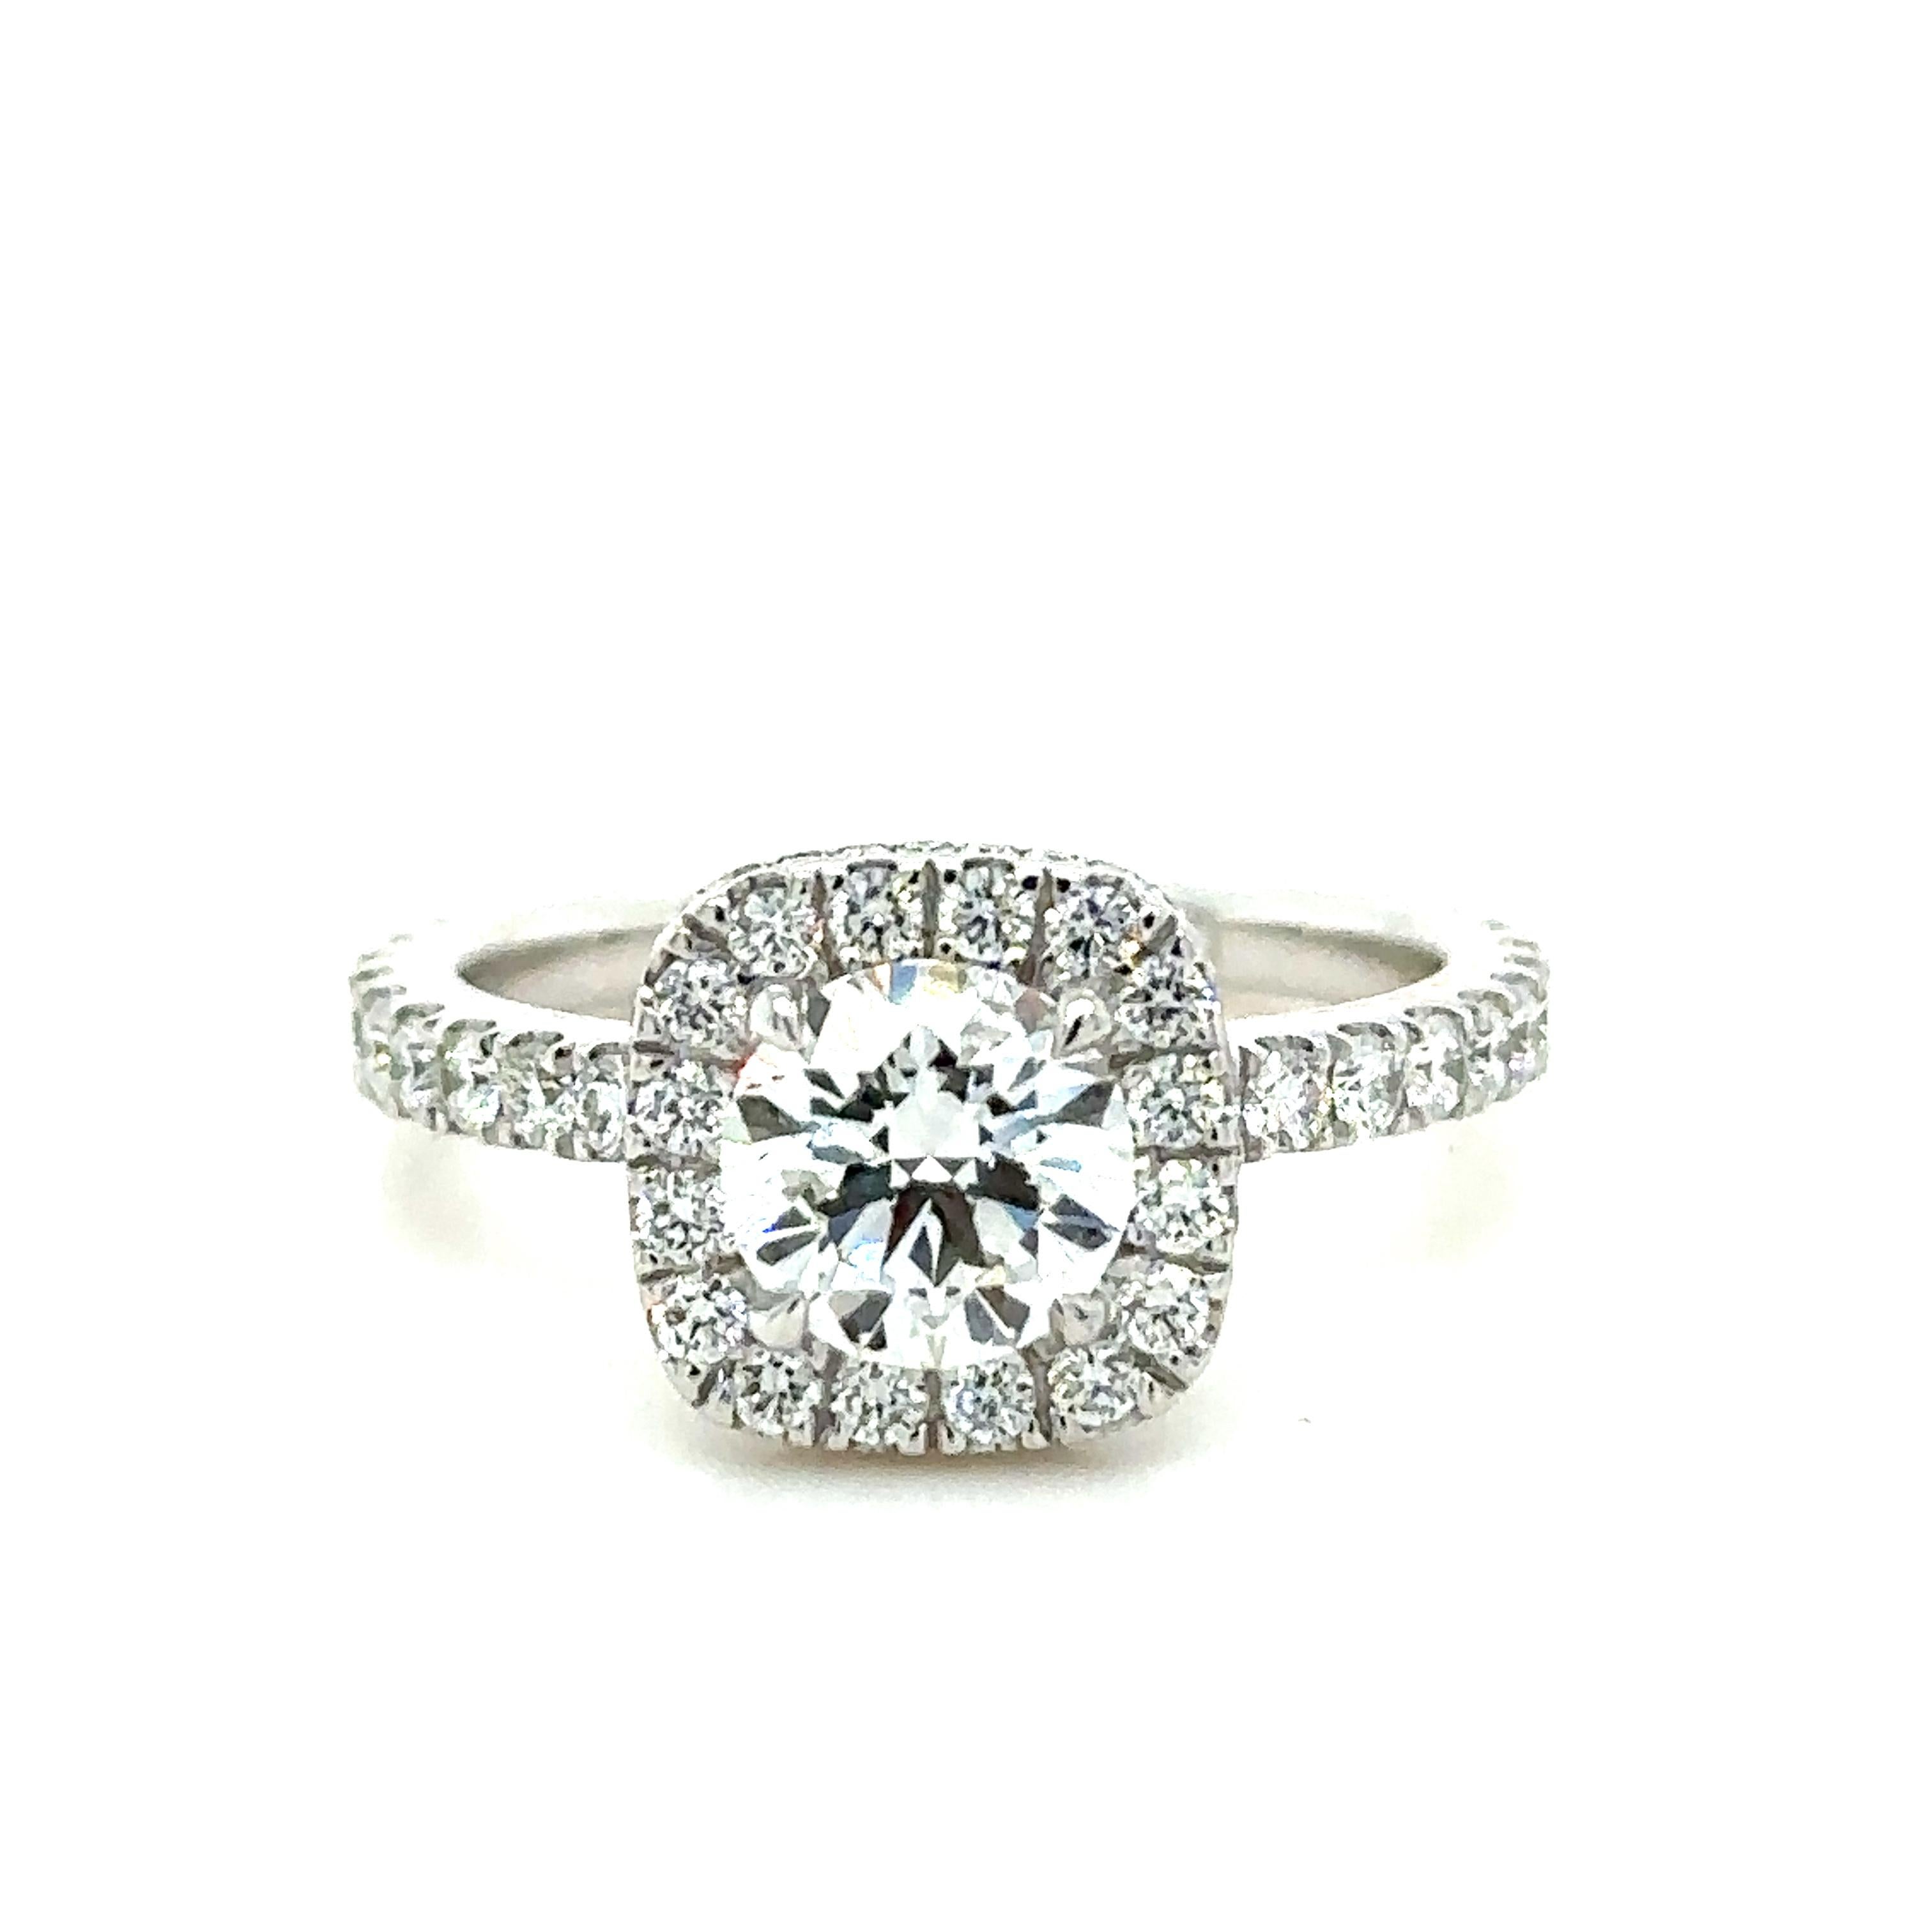 Unique features:

Diamond engagement ring. Made of 18 kt White Gold, in a halo setting, and weighing 4.63 gm. Stamped: Cerrone 750.

Set with a Round, brilliant cut Diamond, colour D, and clarity VS2. Weighing 1.01 ct. Certificate provided from GIA.